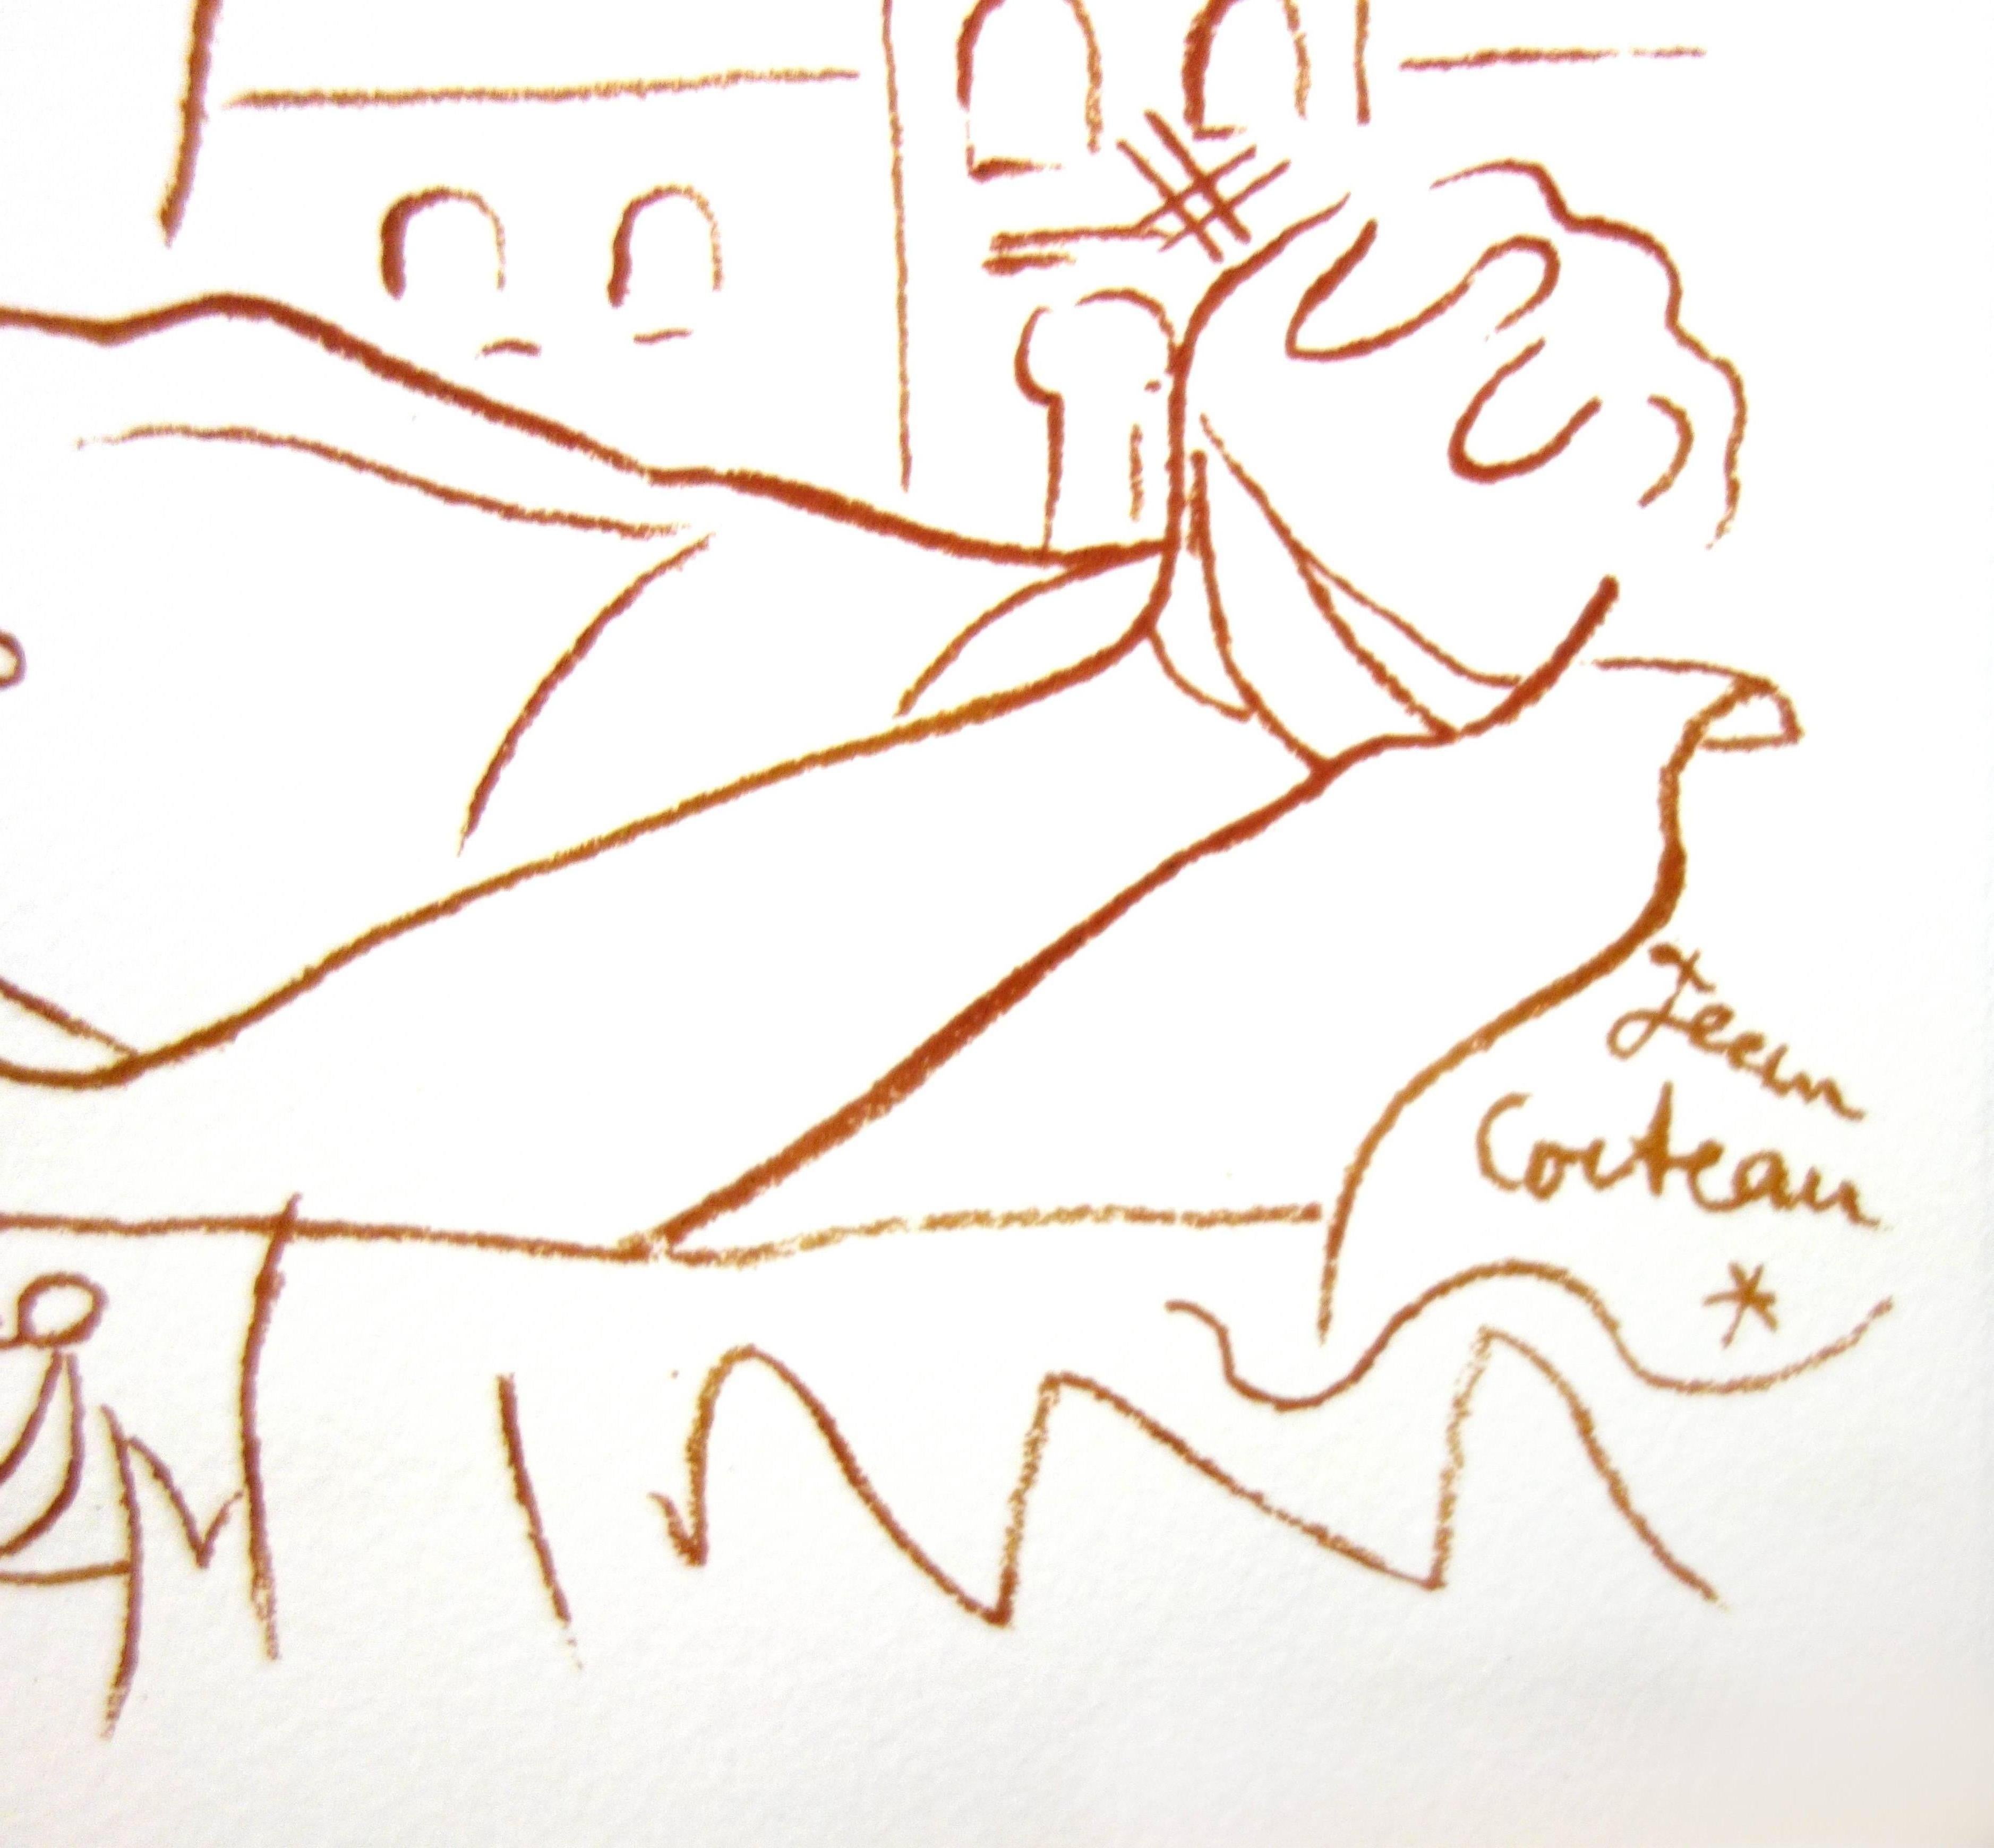 Original Lithograph by Jean Cocteau
Title: Taureaux
Signed in the plate
Dimensions: 40 x 30 cm
Edition: 200
Luxury print edition from the portfolio of Trinckvel
1965